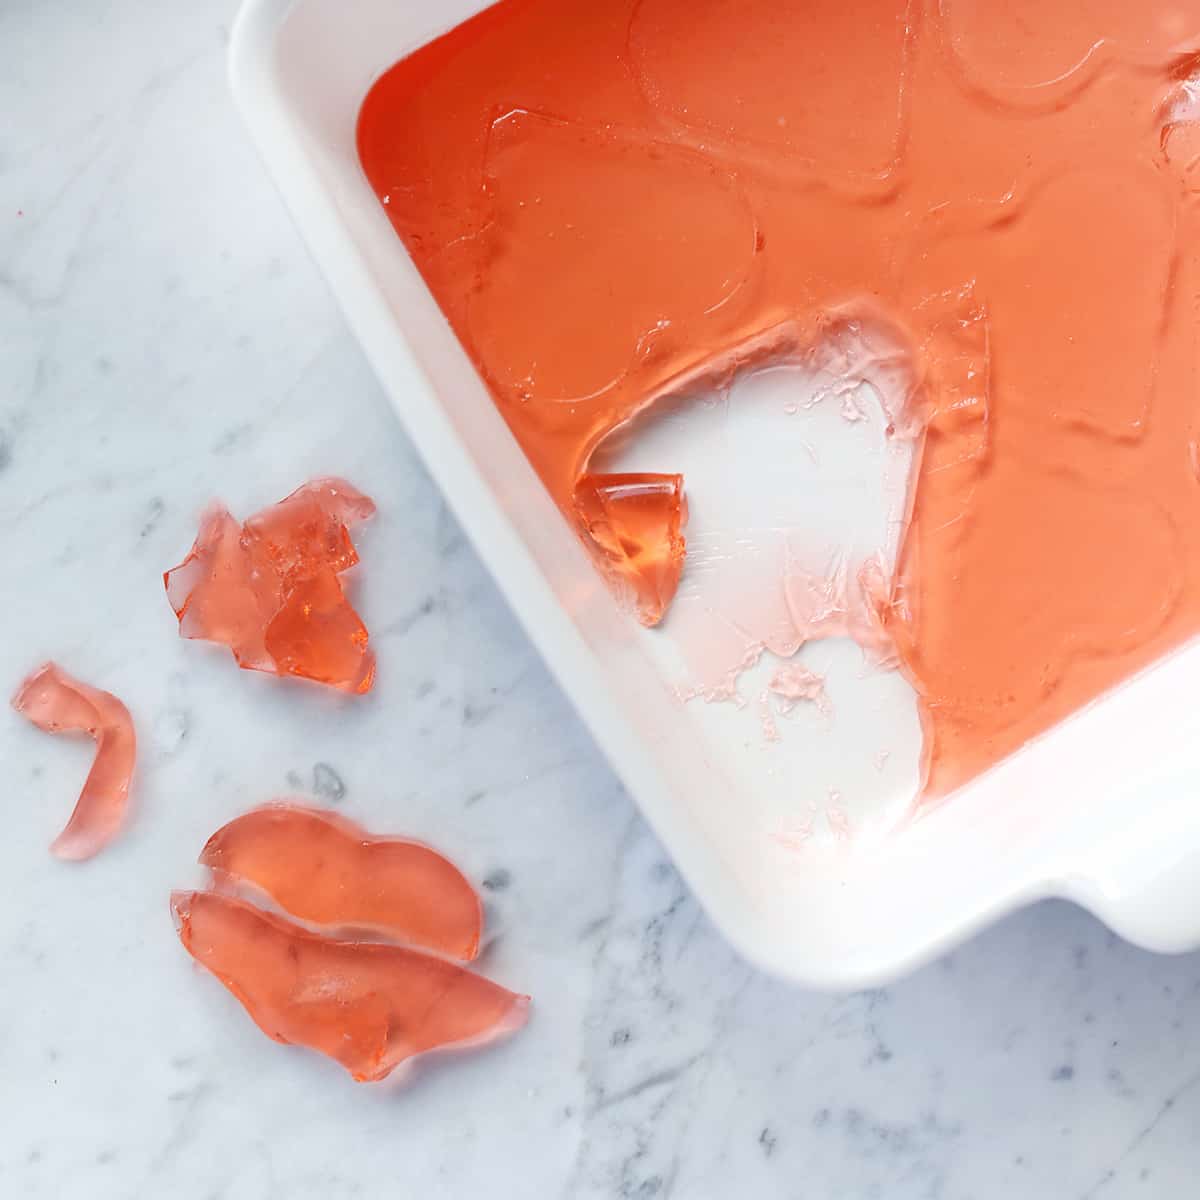 Jell-O Jigglers - Only 2 Ingredients! - Kids Activity Zone